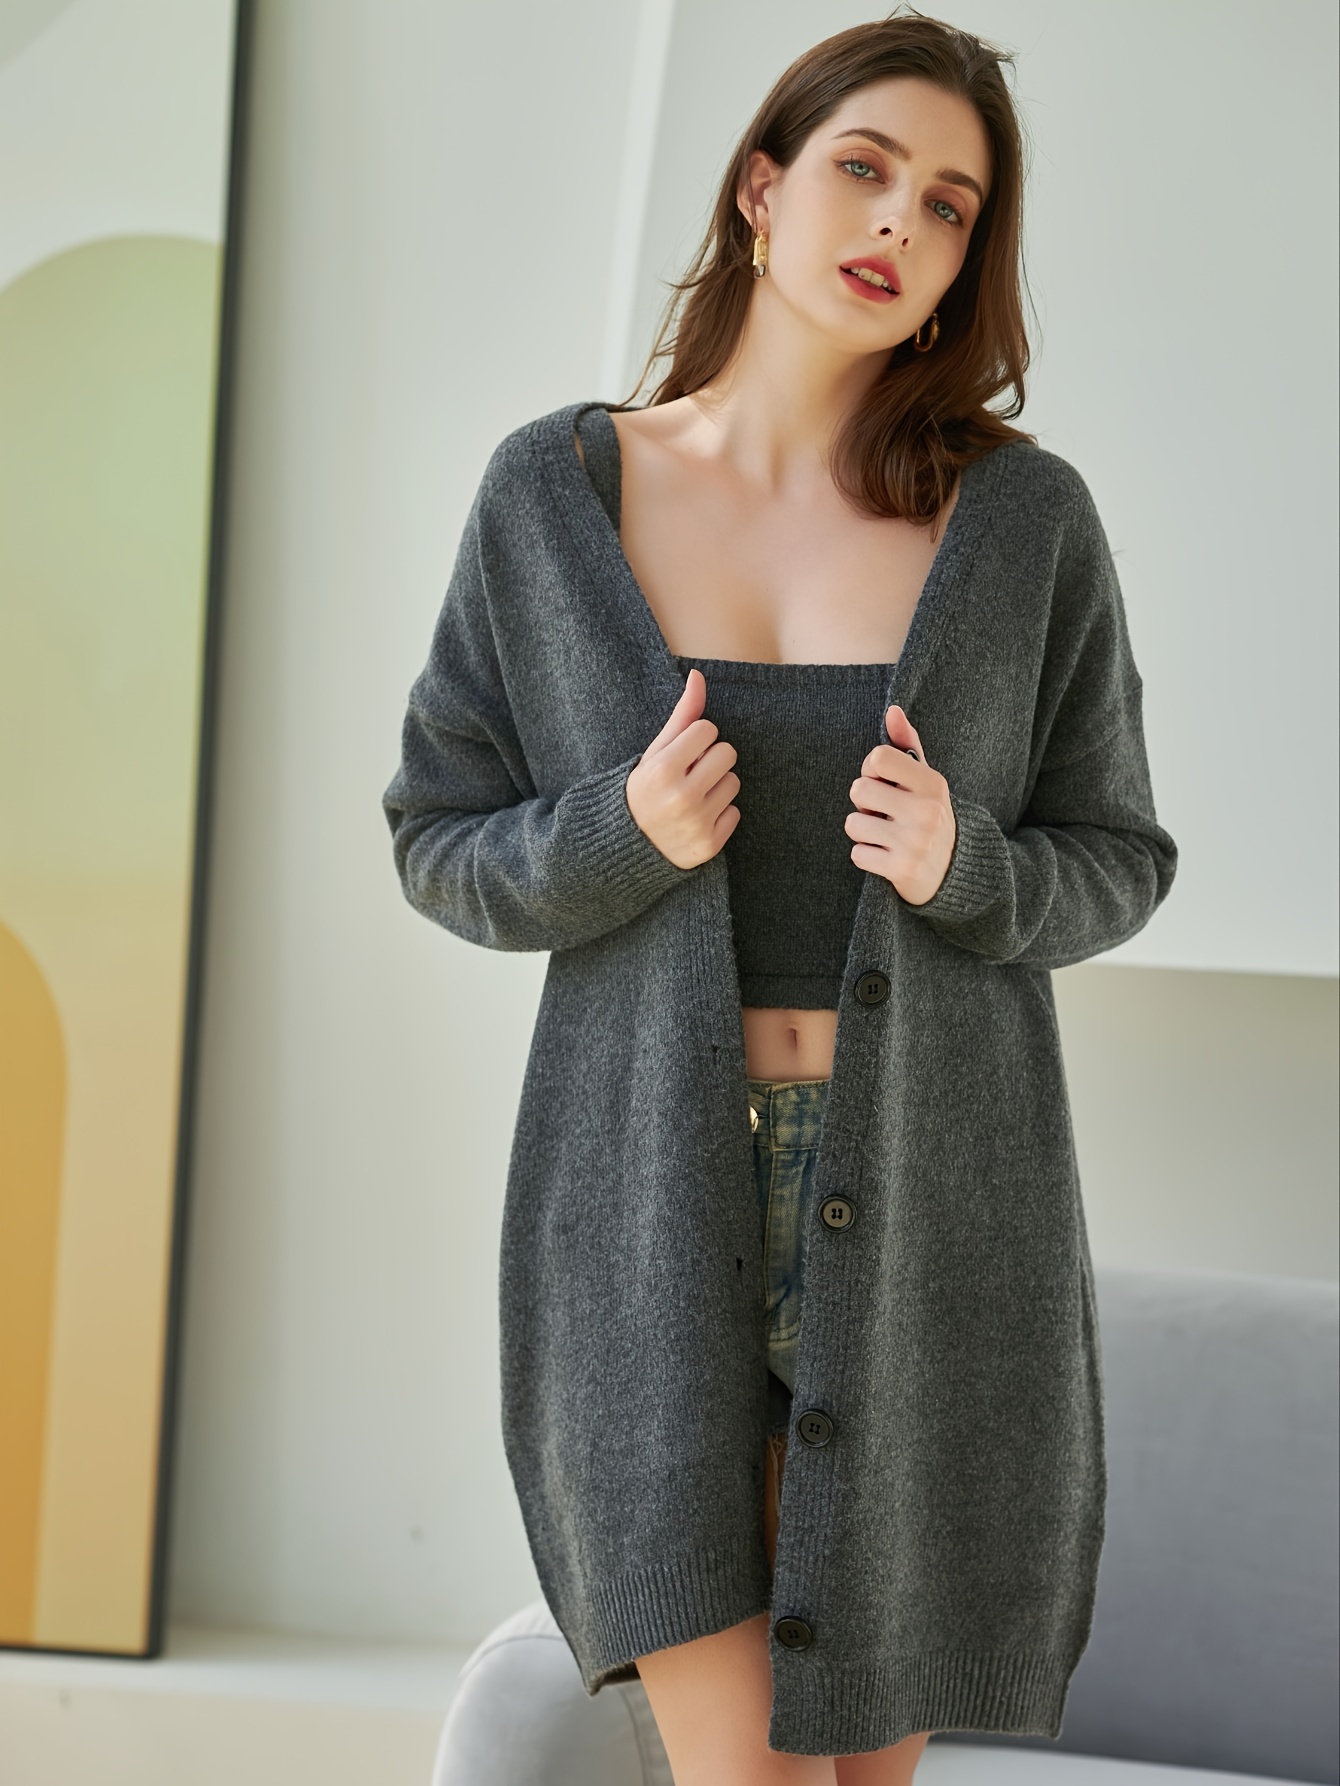 Solid Color Knit Two-piece Set, Casual Sleeveless Crop Top & Button Front  Long Sleeve Cardigan Outfits, Women's Clothing